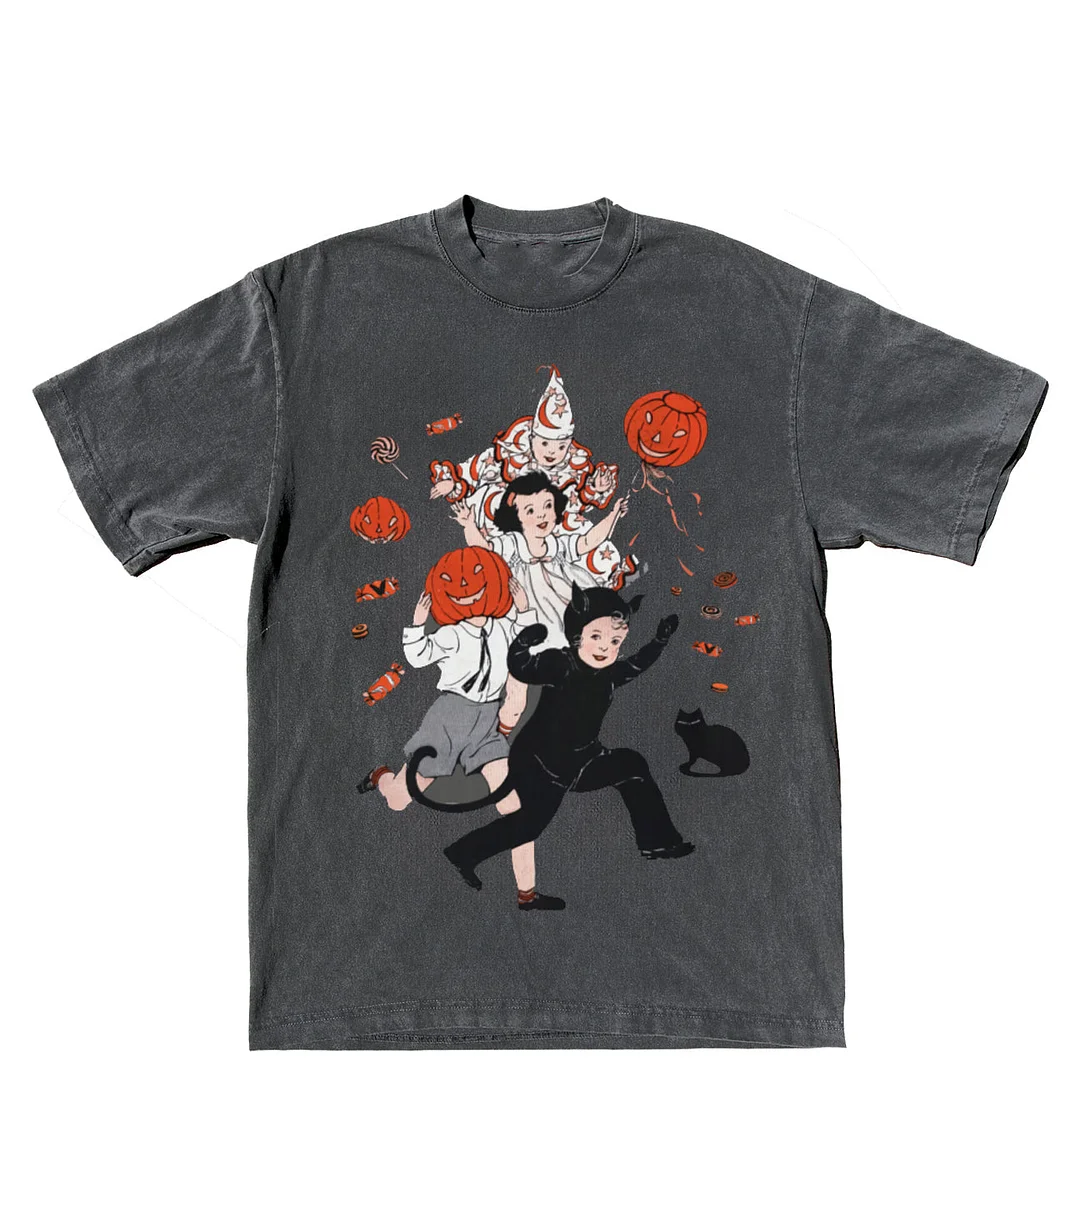 Let's Trick or Treat Girls! T-Shirt